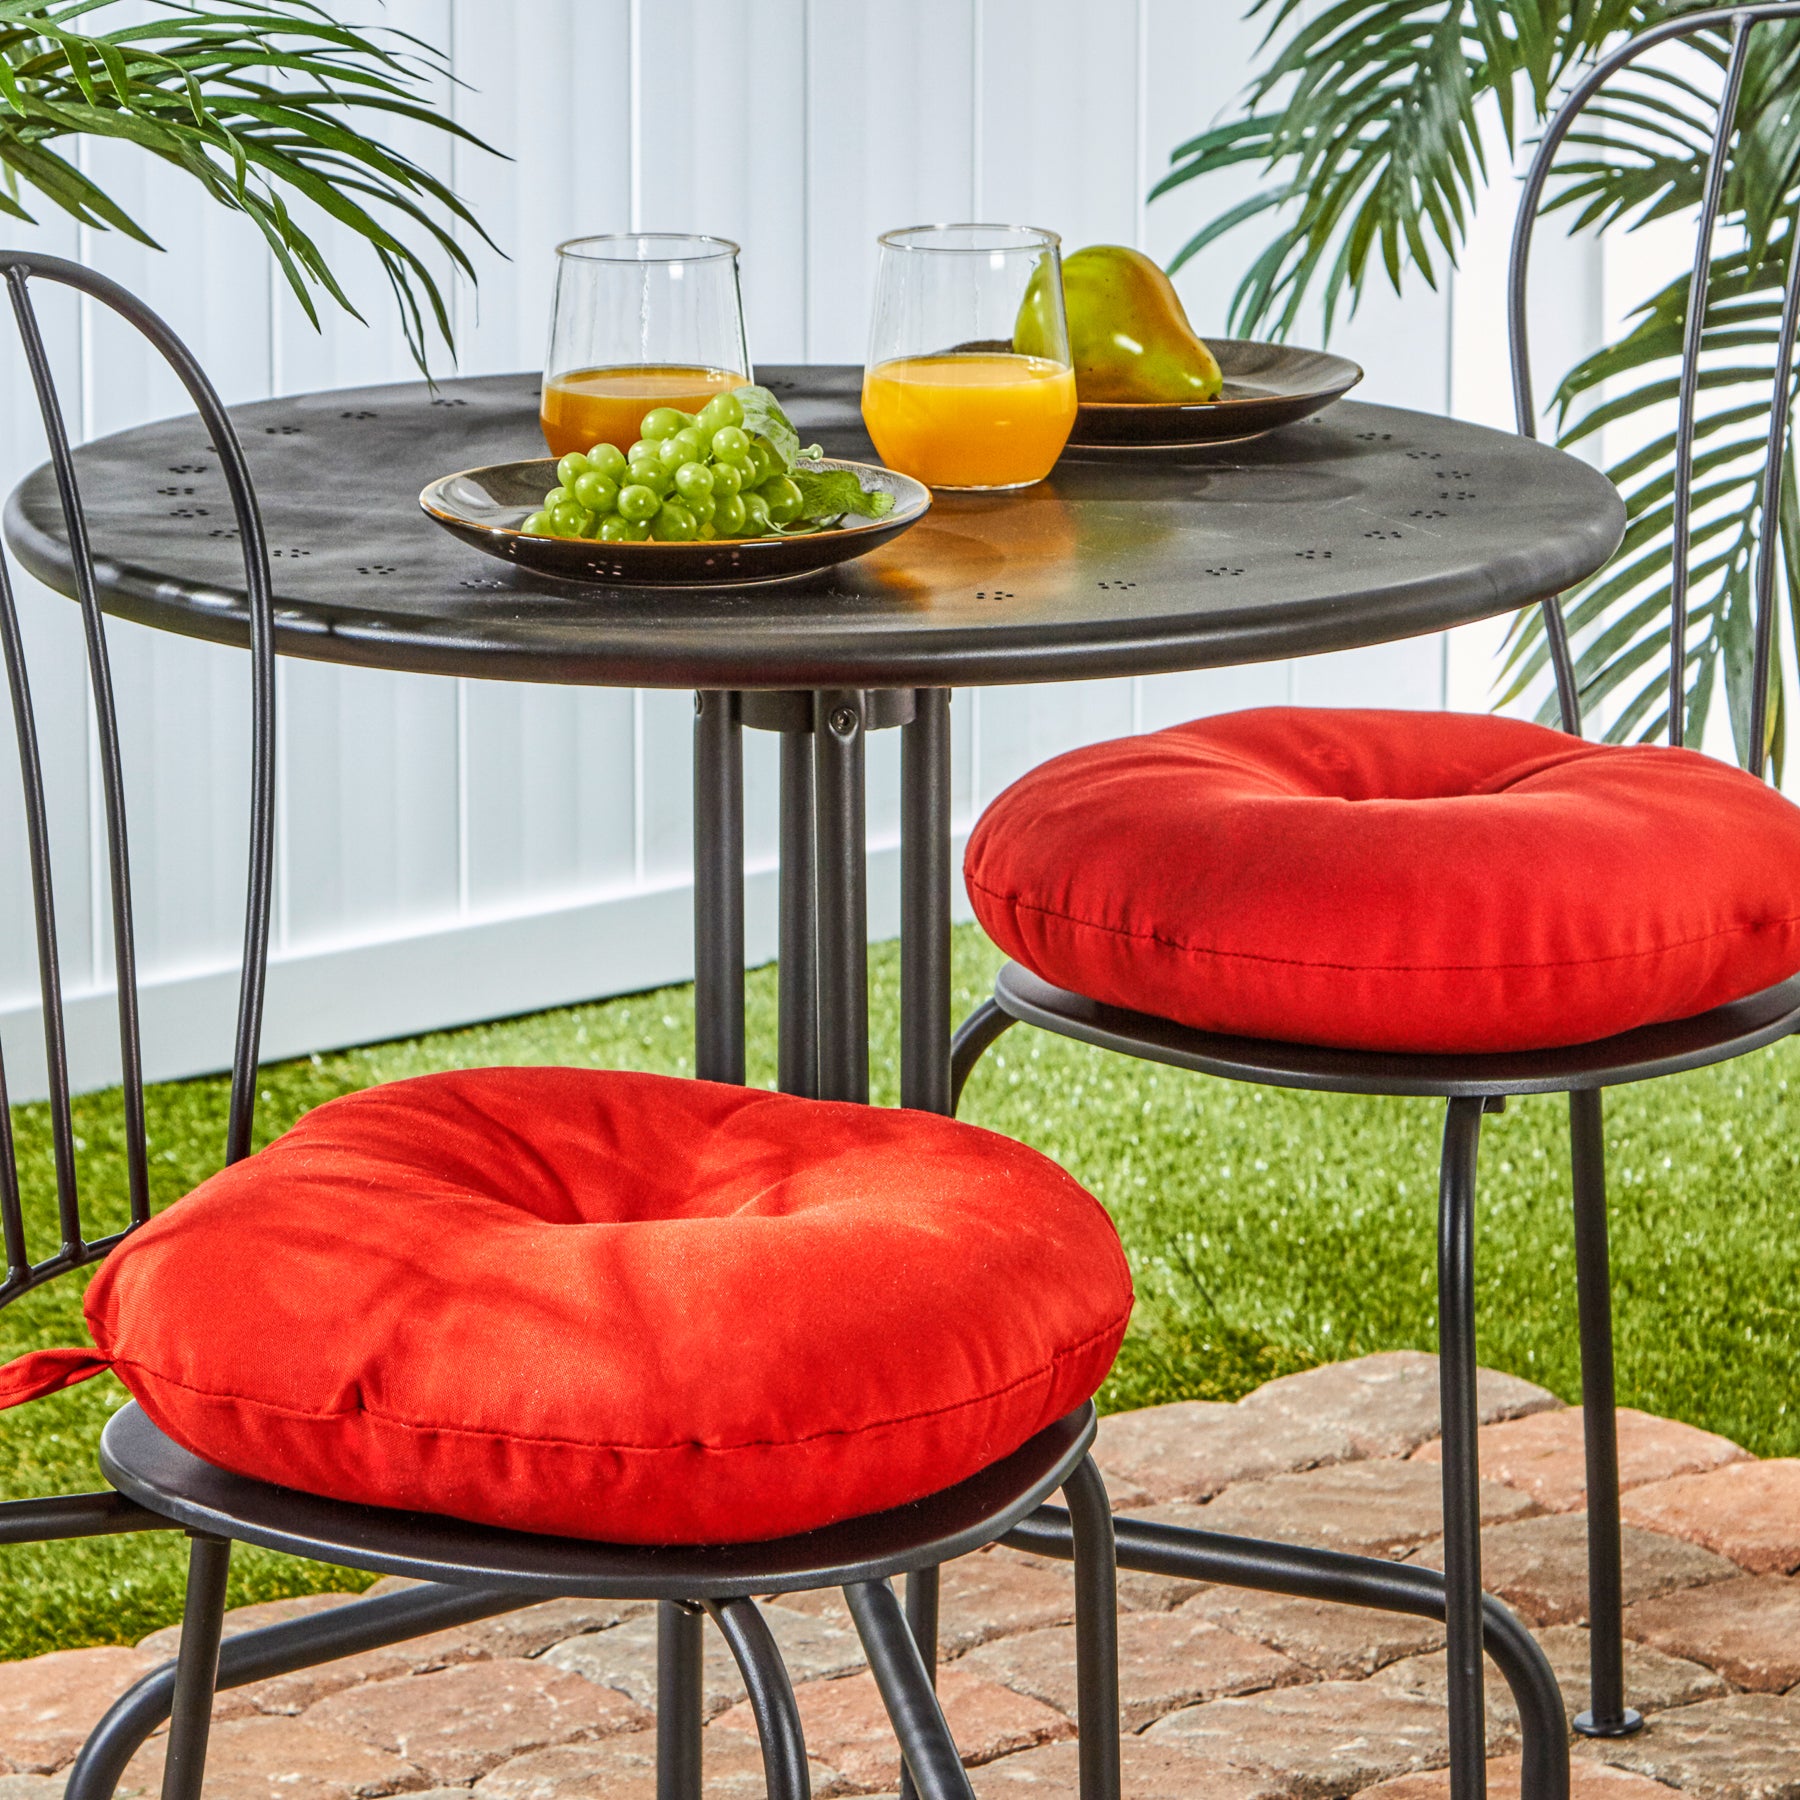 Greendale Home Fashions Rust 15 in. Round Outdoor Reversible Bistro Seat Cushion (Set of 2) - image 3 of 70